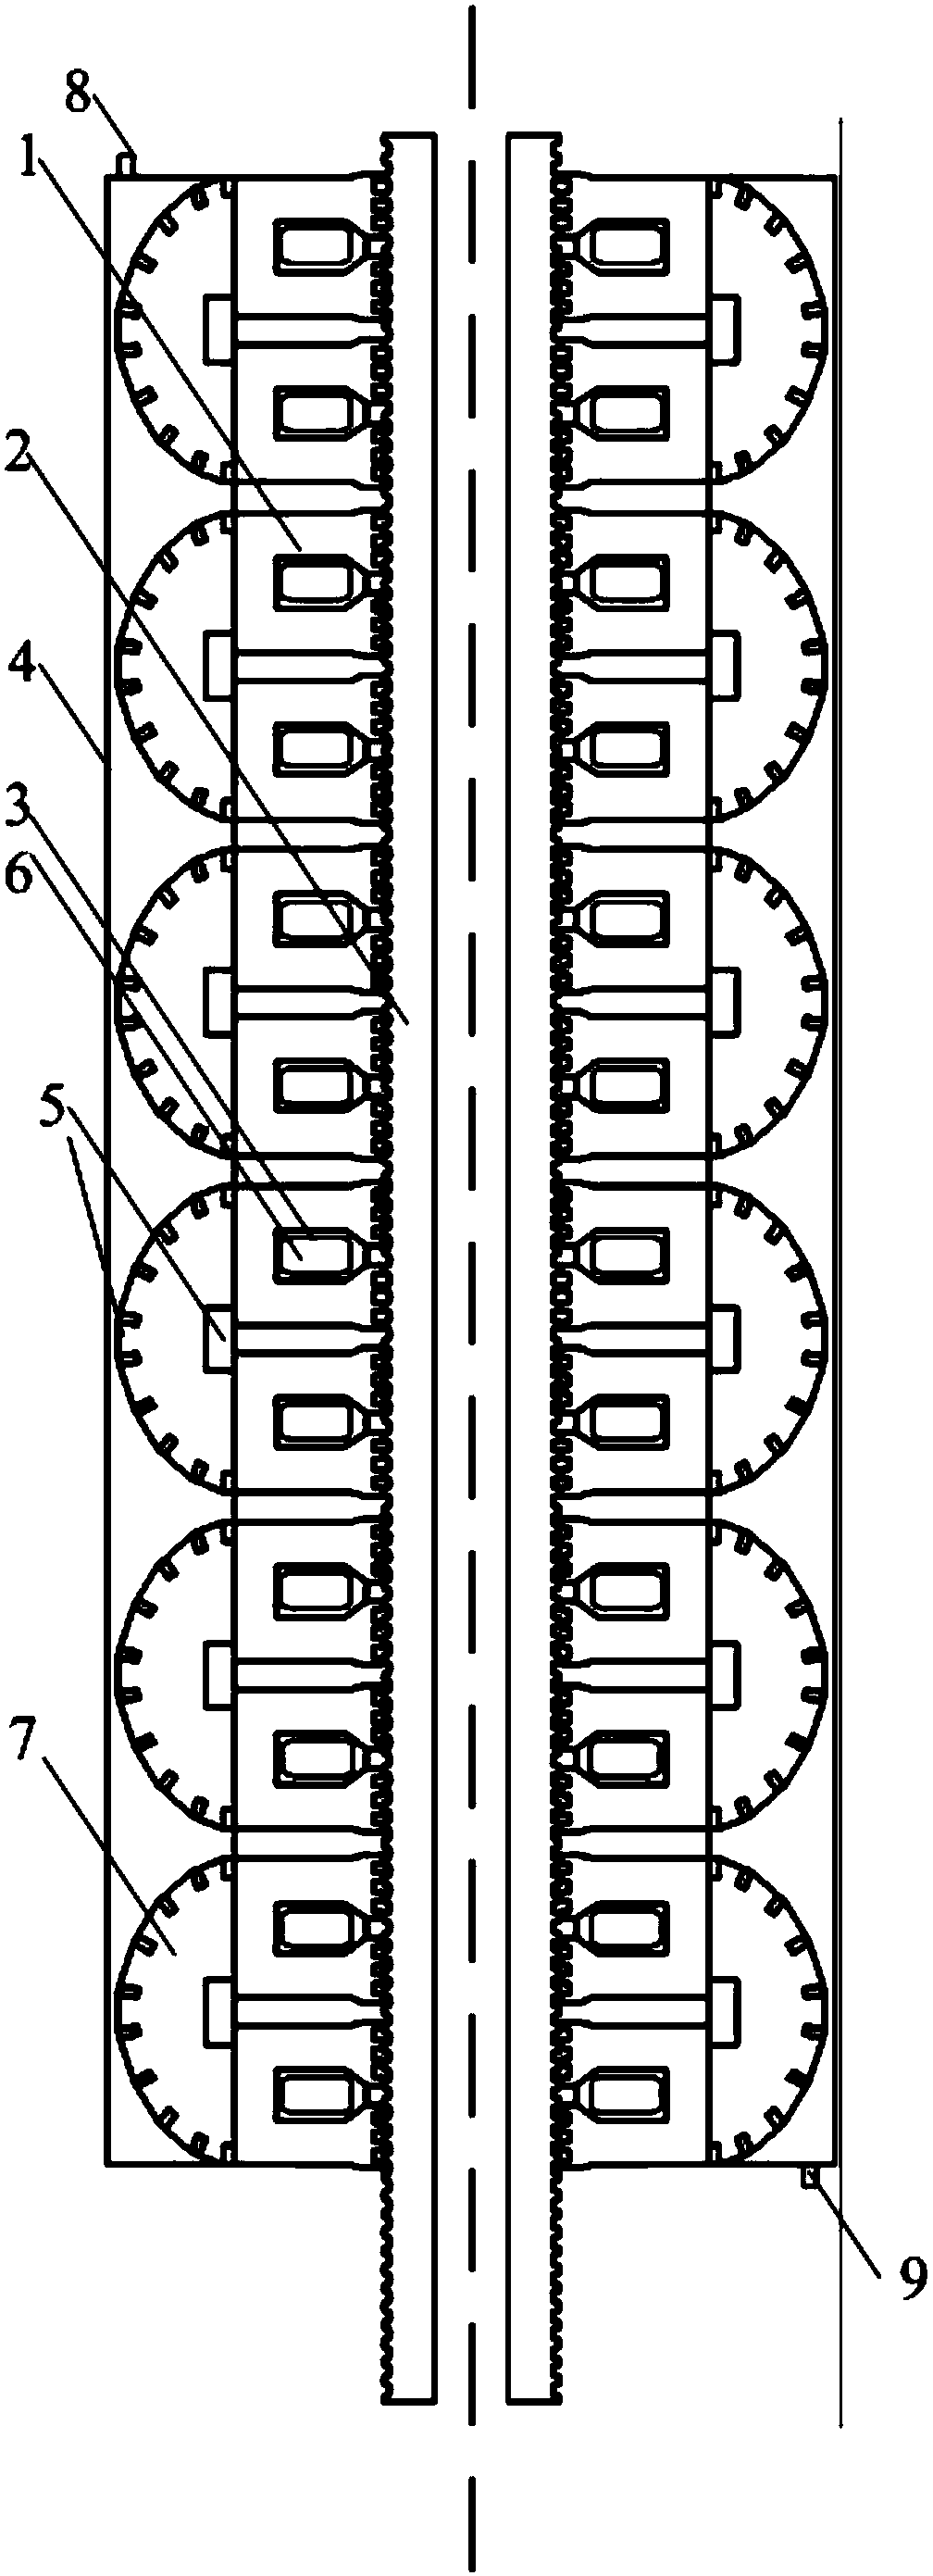 A fully superconducting primary excitation linear generator for direct drive wave power generation